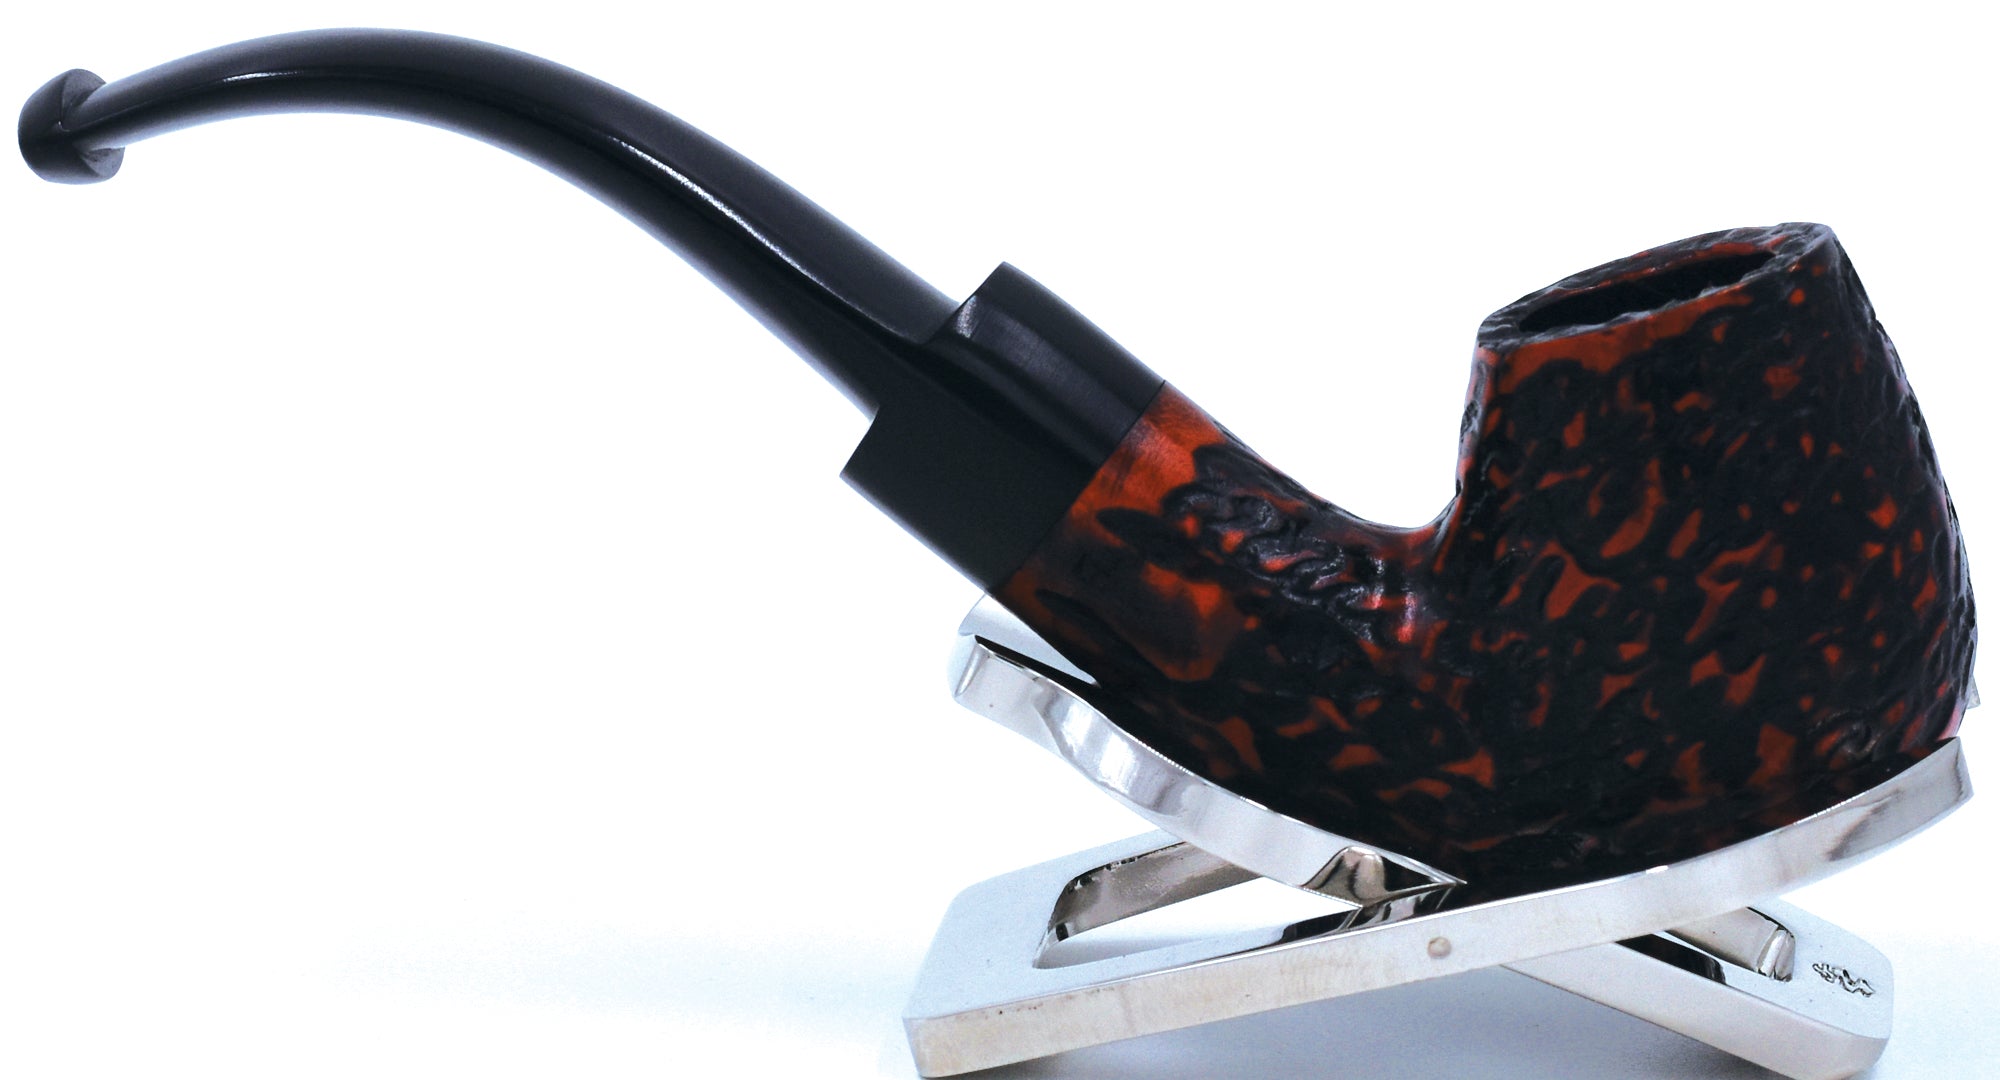 LEGENDEX® LASCALA* 9 MM Filtered Briar Smoking Pipe Made In Italy 01-08-505 Acrylic Series